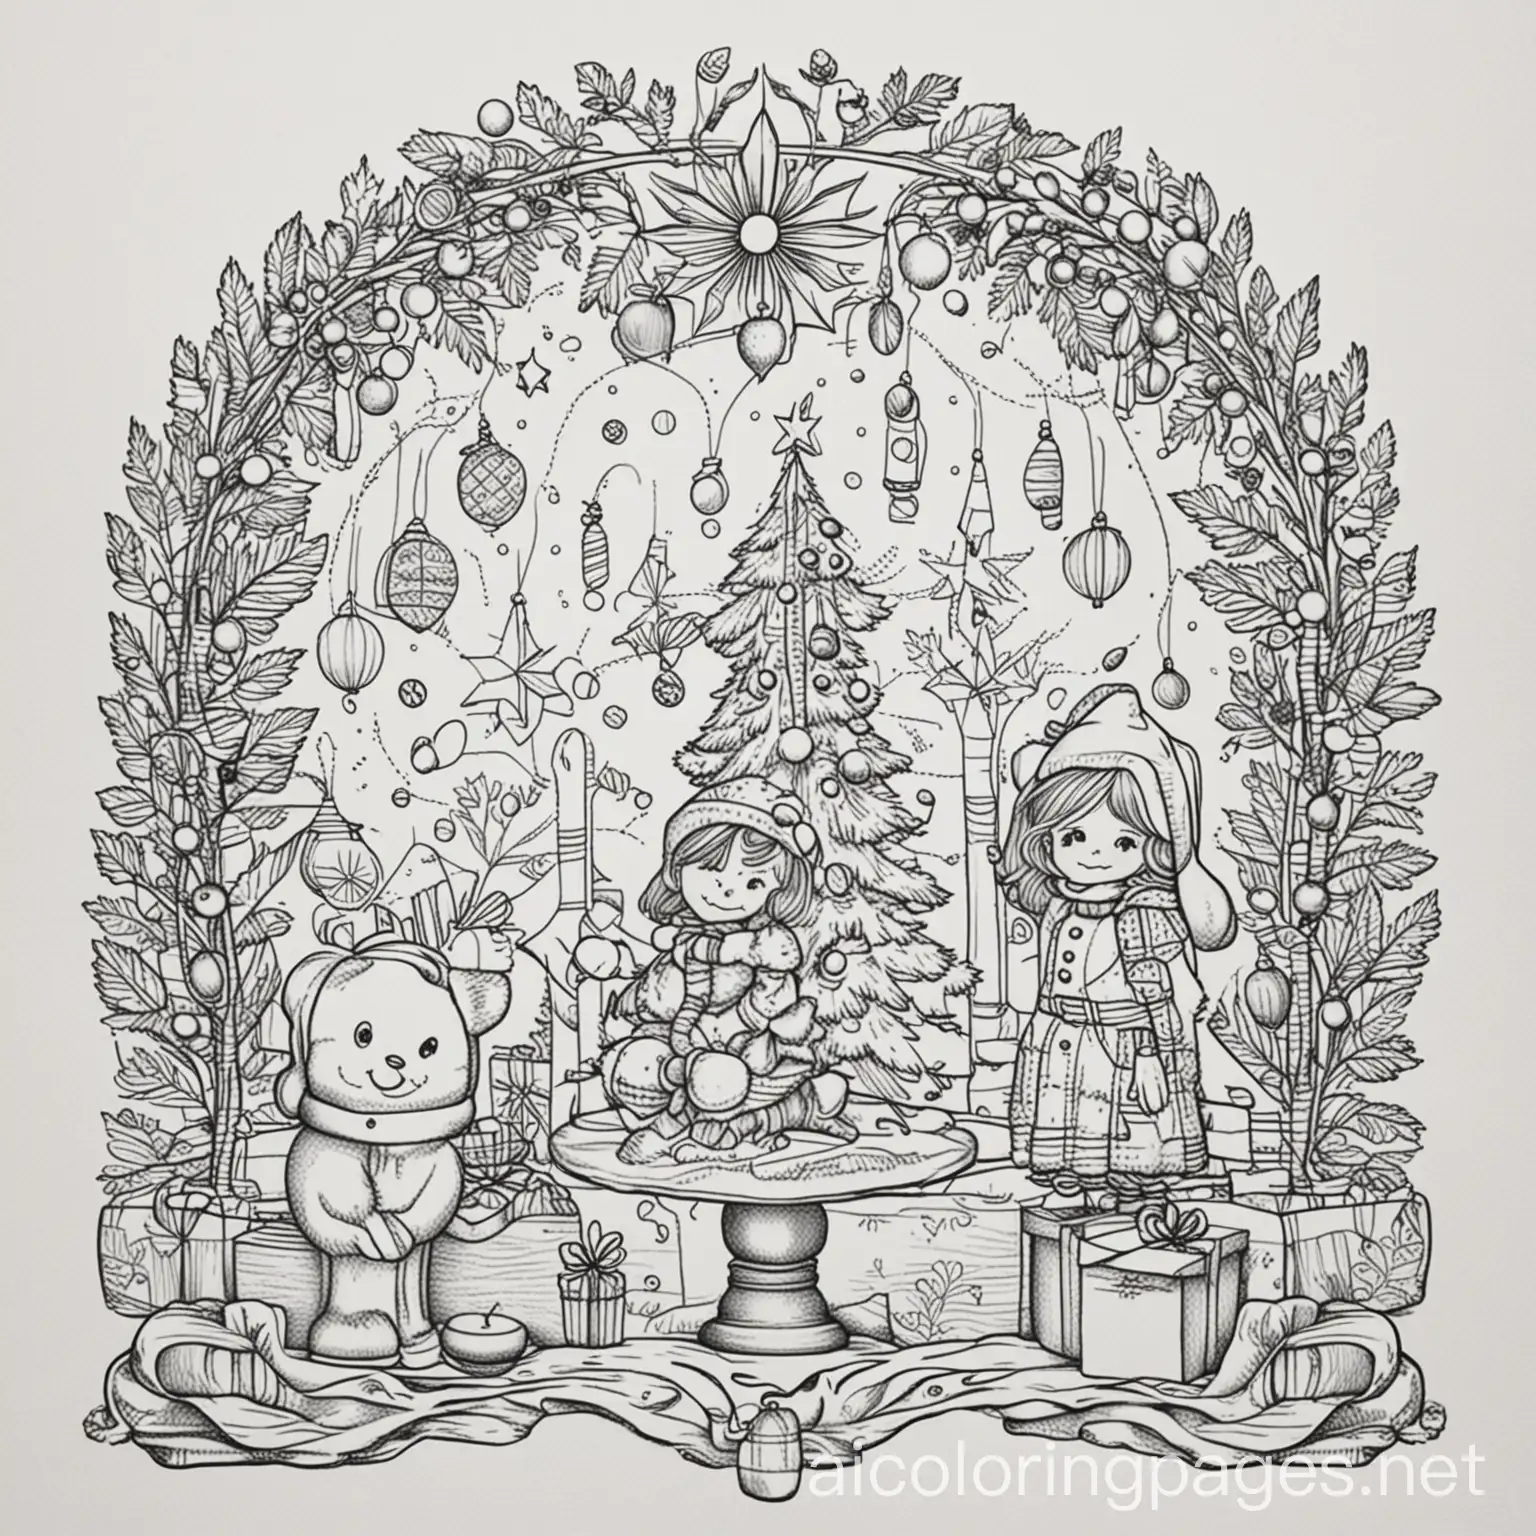 Vintage-Christmas-Decor-Coloring-Page-Simple-Black-and-White-Line-Art-on-White-Background